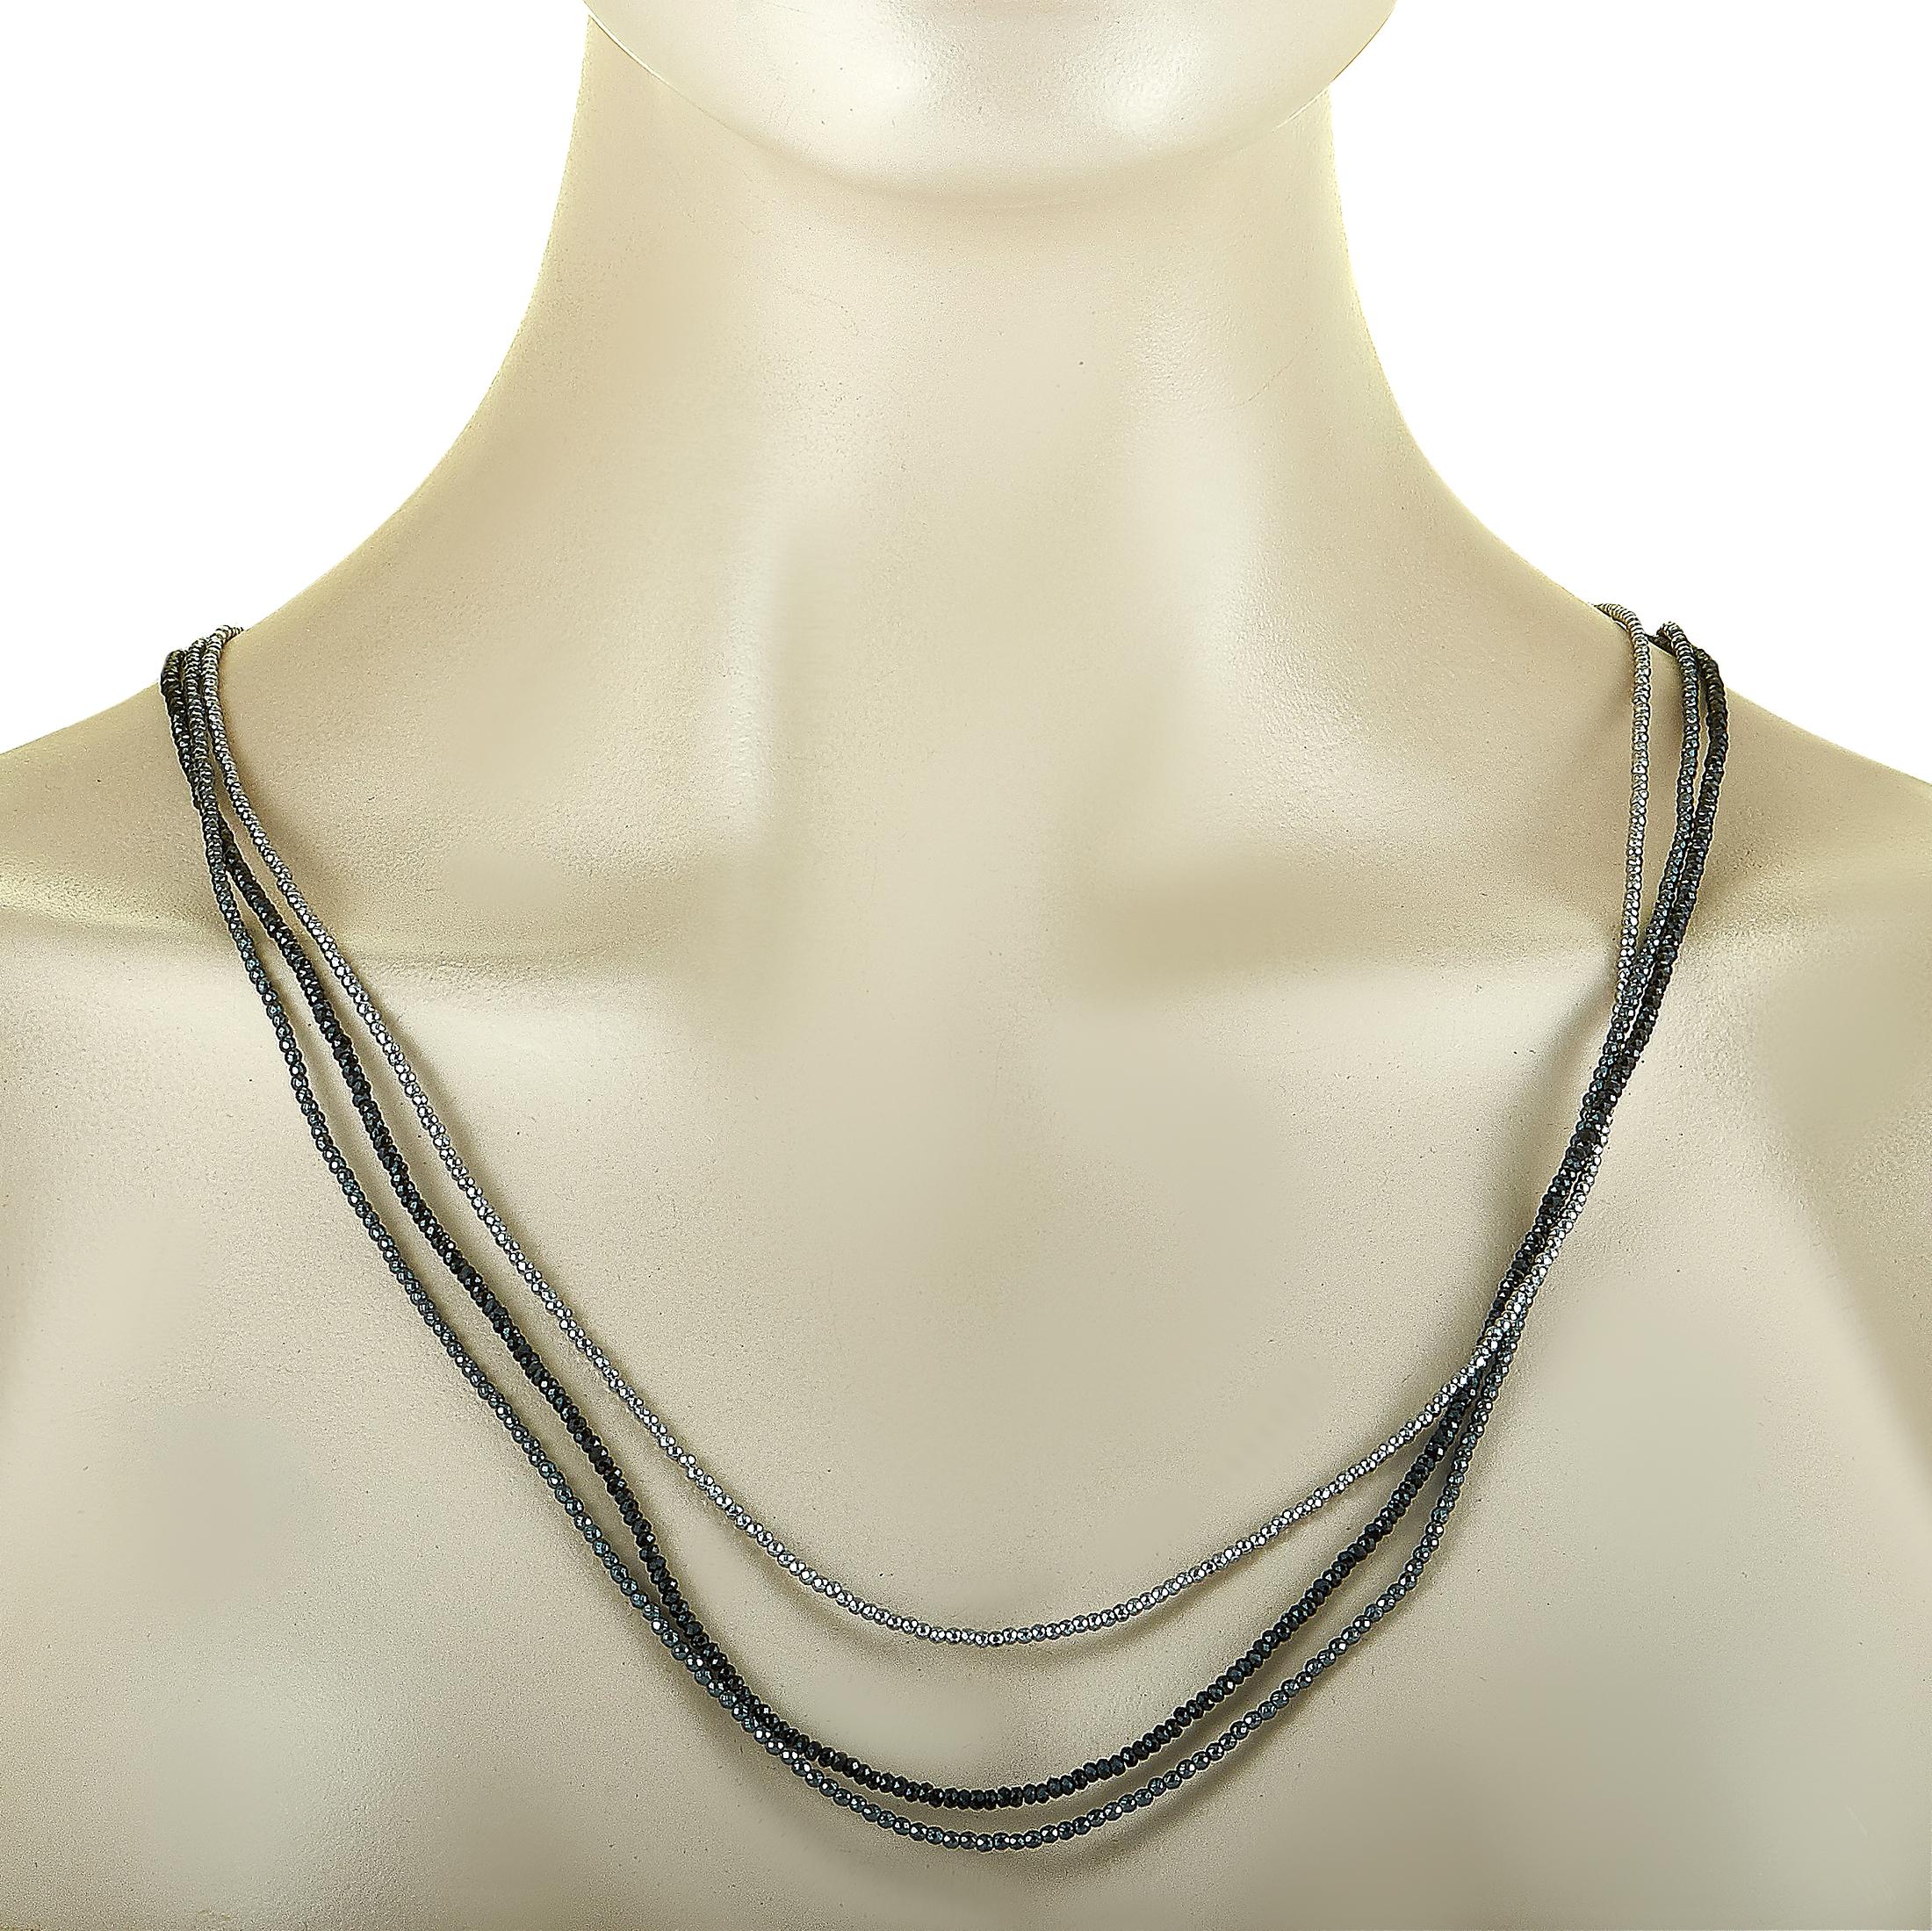 This King Baby multistrand necklace is made out of sterling silver and spinels and weighs 33.8 grams, measuring 32” in length.

Offered in brand new condition, the necklace includes the manufacturer’s pouch.